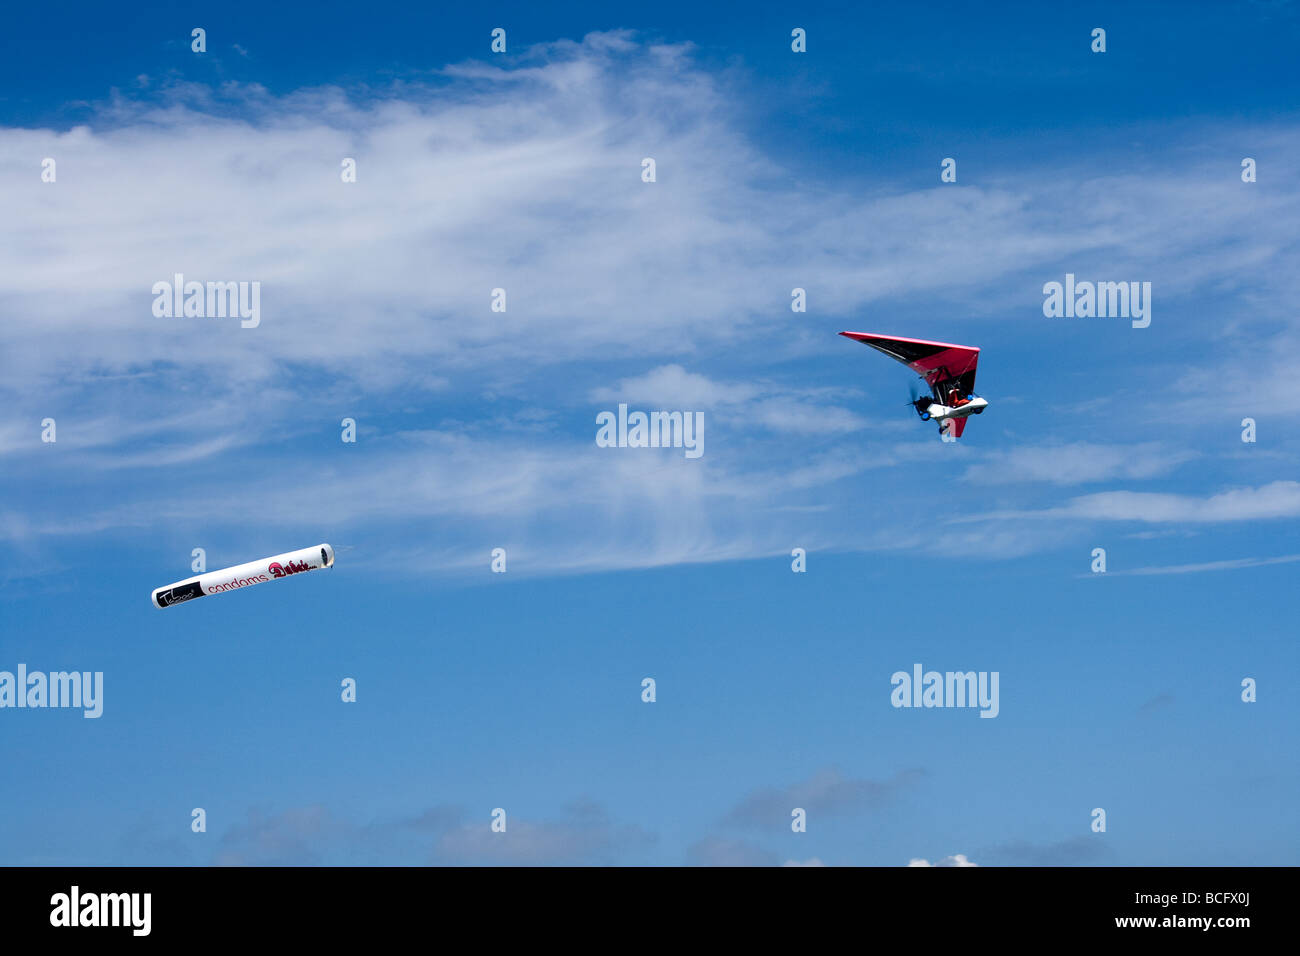 Photograph of Ultralight trike with condoms advertisements on its wing, and its back, flying on intense blue sky. Stock Photo